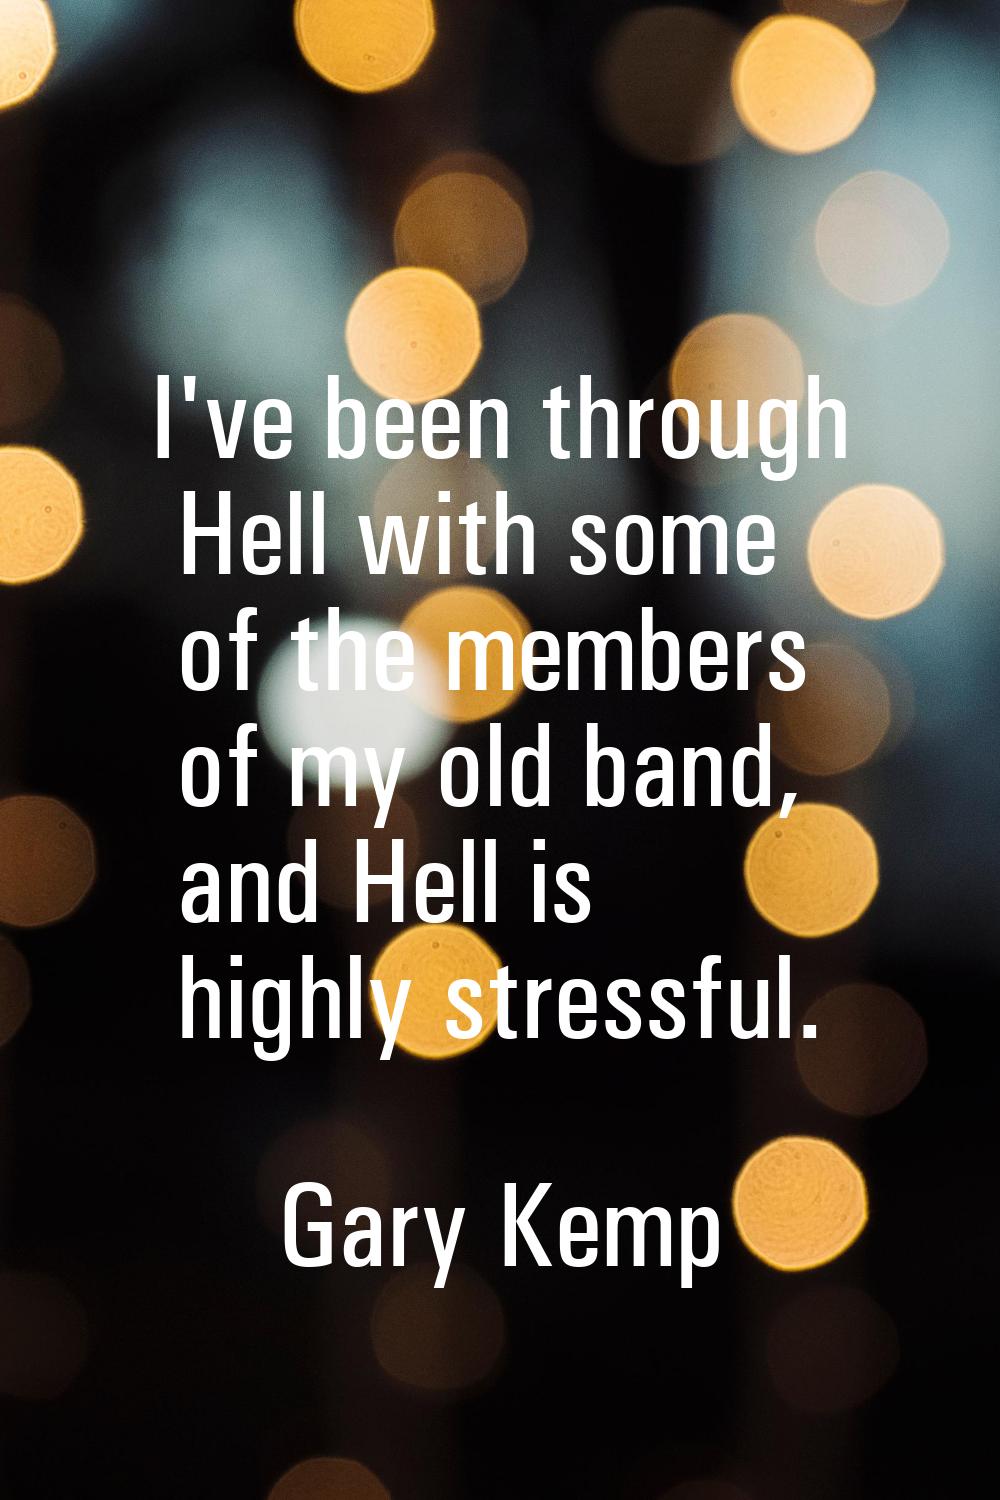 I've been through Hell with some of the members of my old band, and Hell is highly stressful.